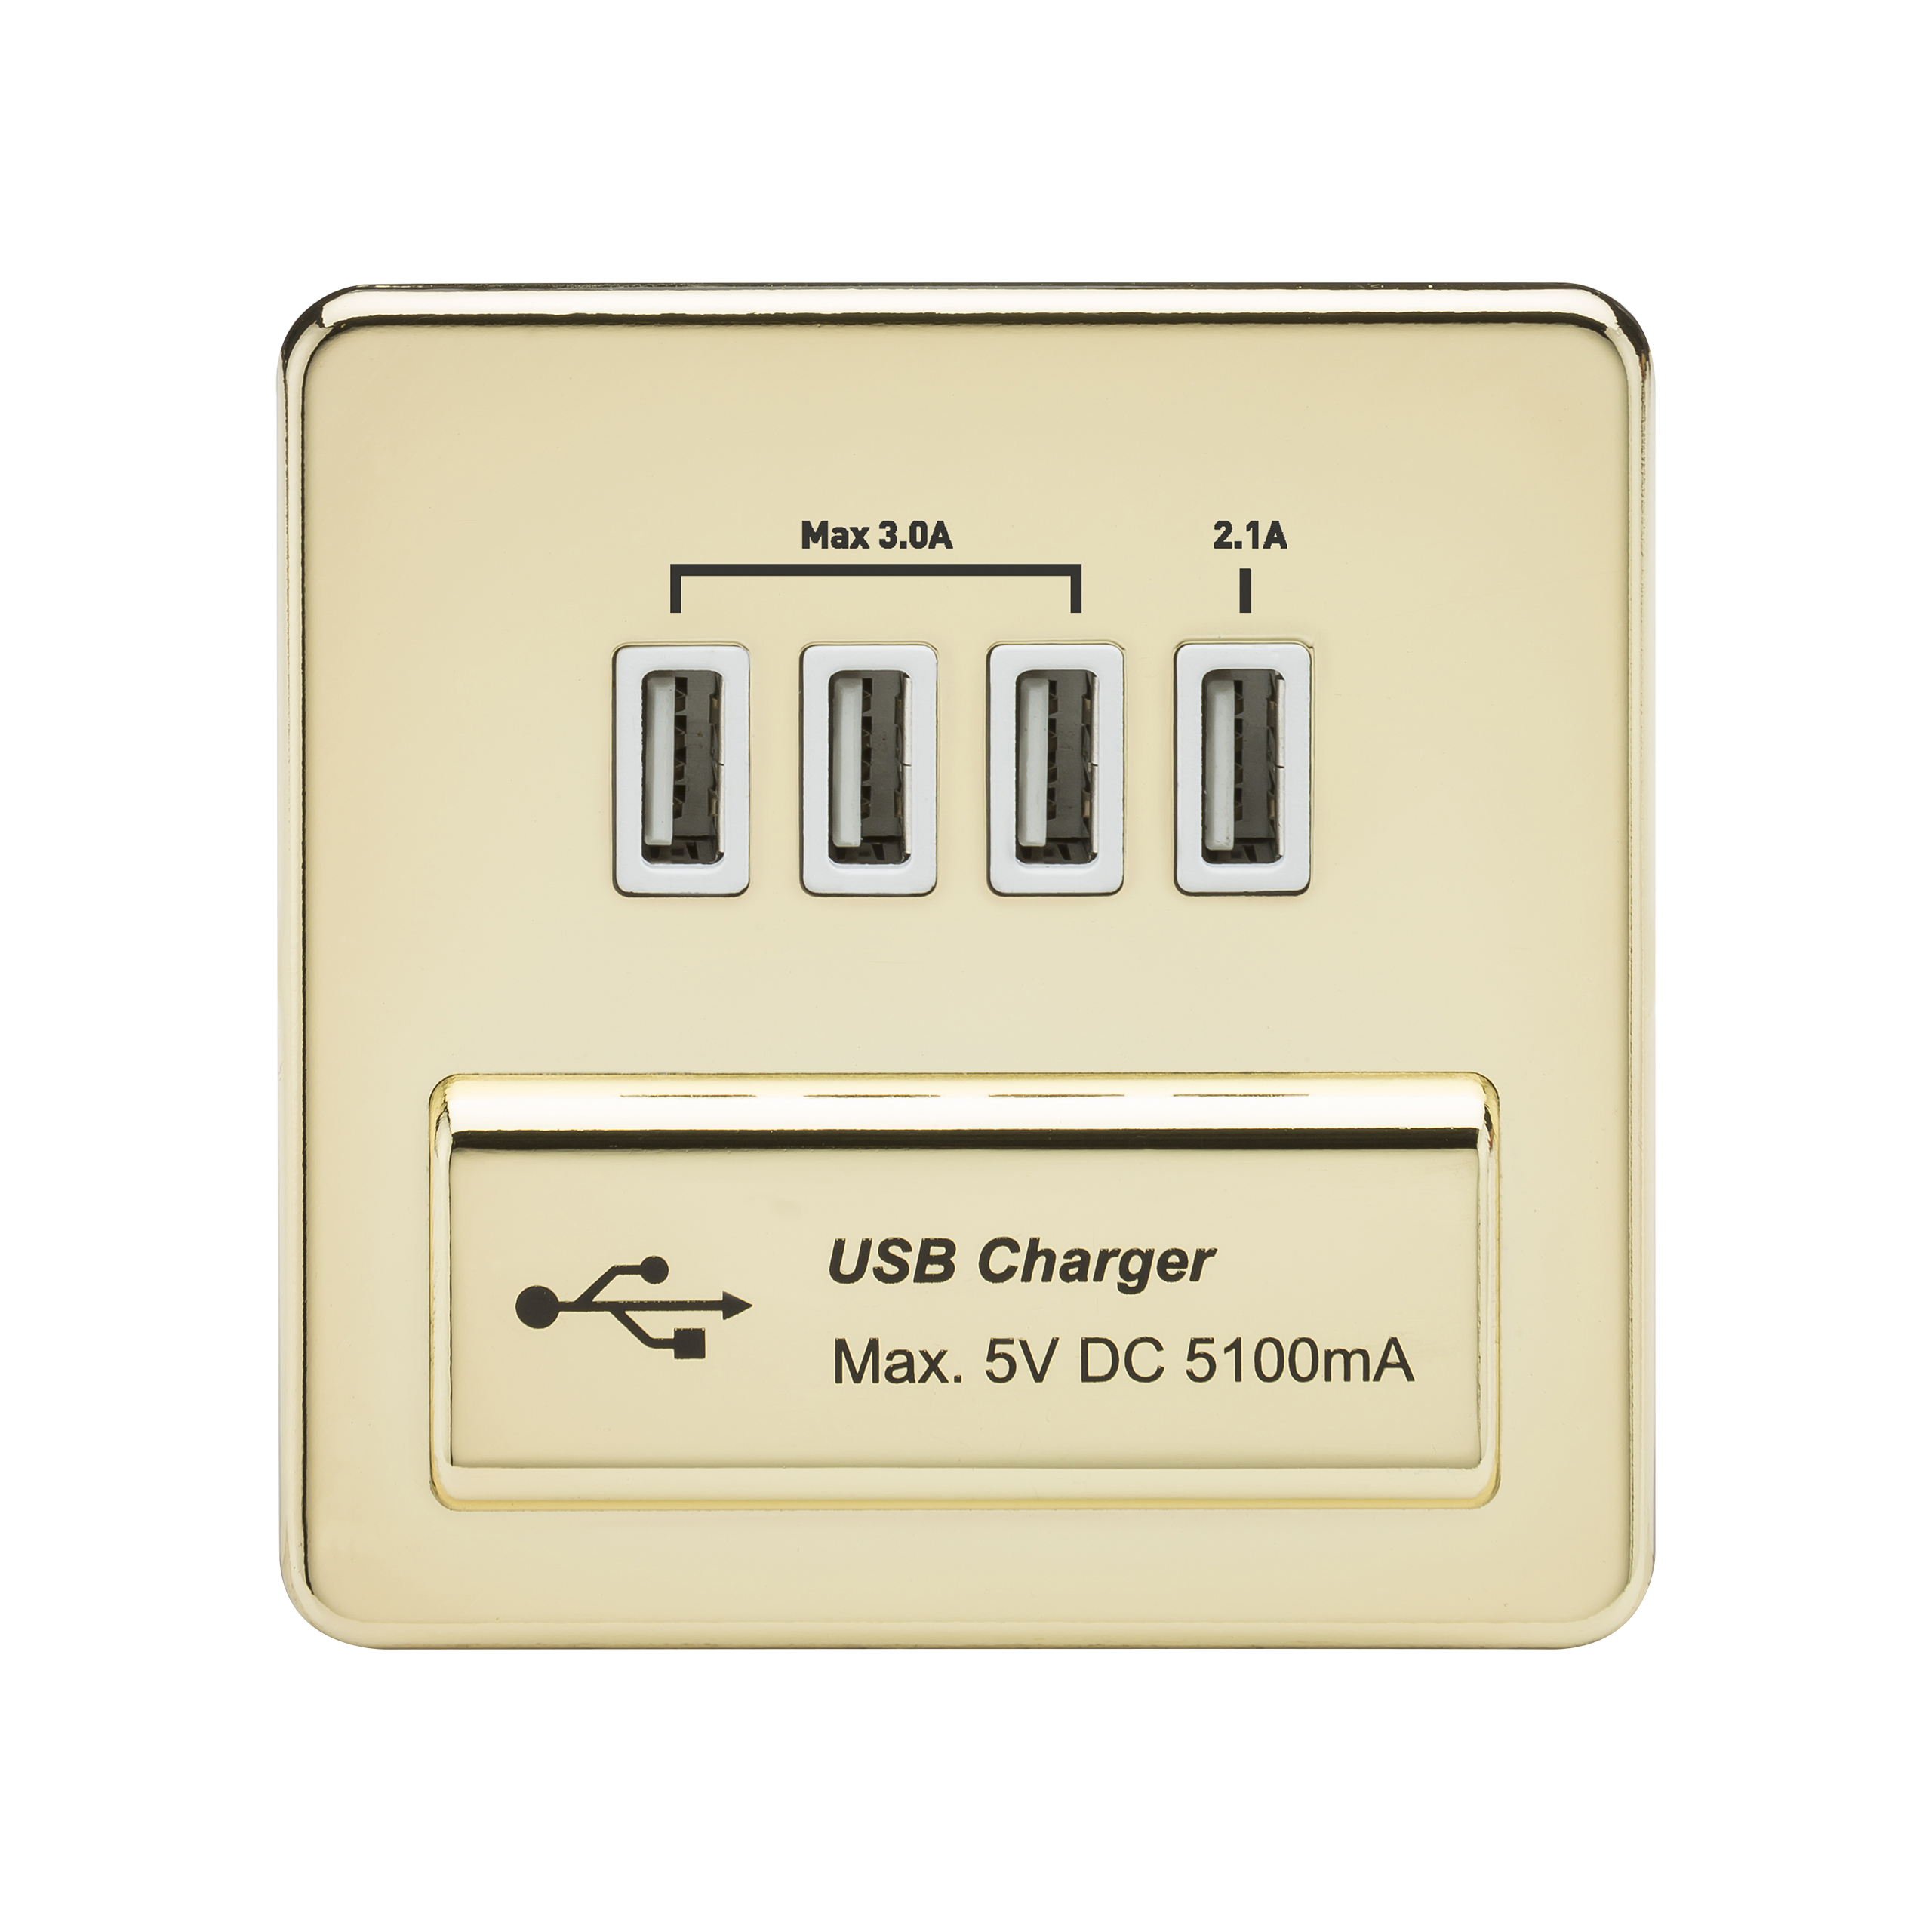 Screwless Quad USB Charger Outlet (5.1A) - Polished Brass With White Insert - SFQUADPBW 